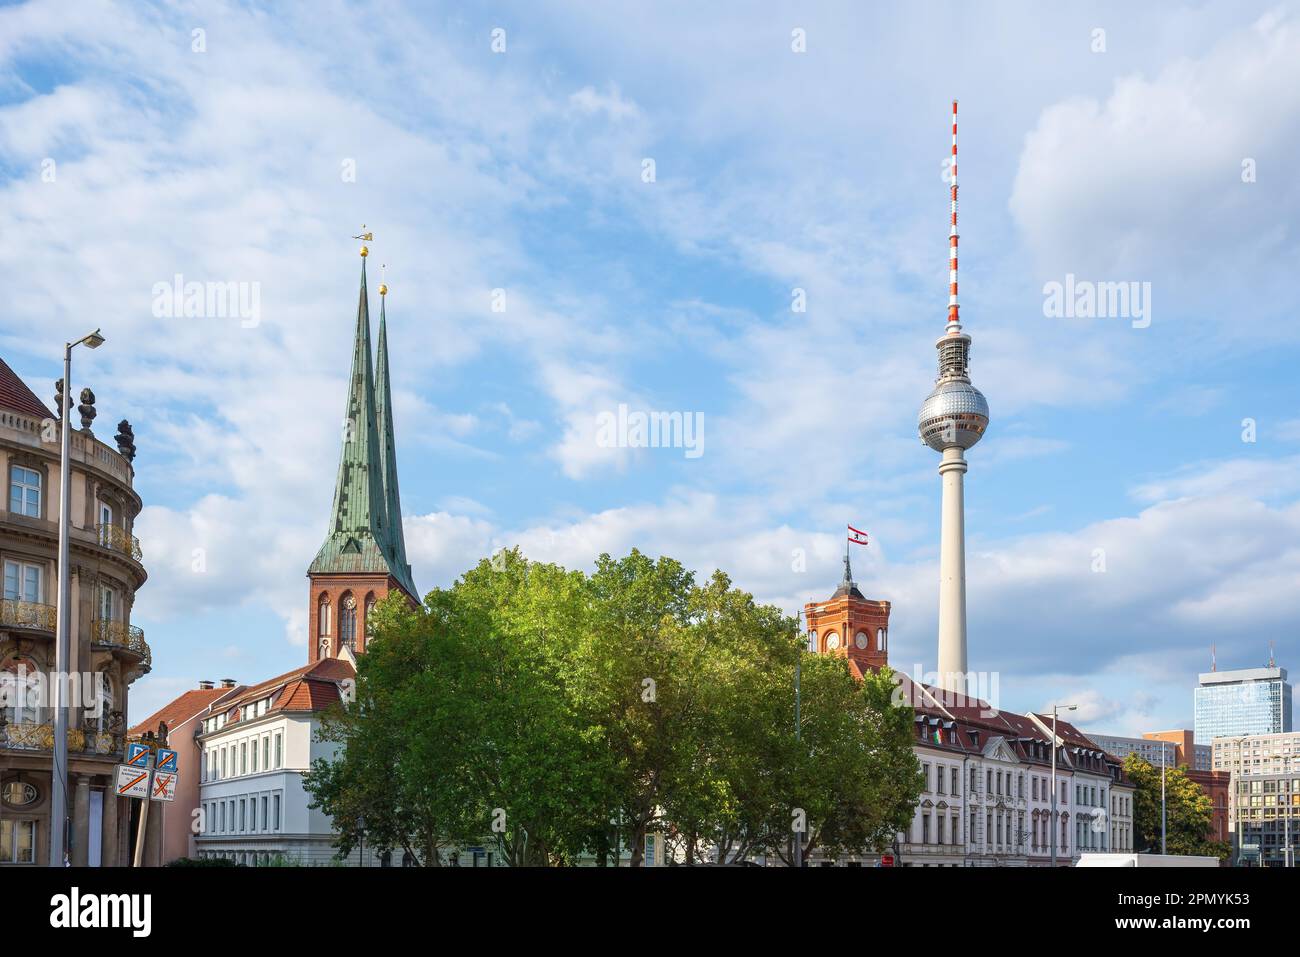 Berlin Mitte Skyline with TV Tower (Fernsehturm) , Berlin City Hall (Rotes Rathaus) and St. Nicholas Church - Berlin, Germany Stock Photo